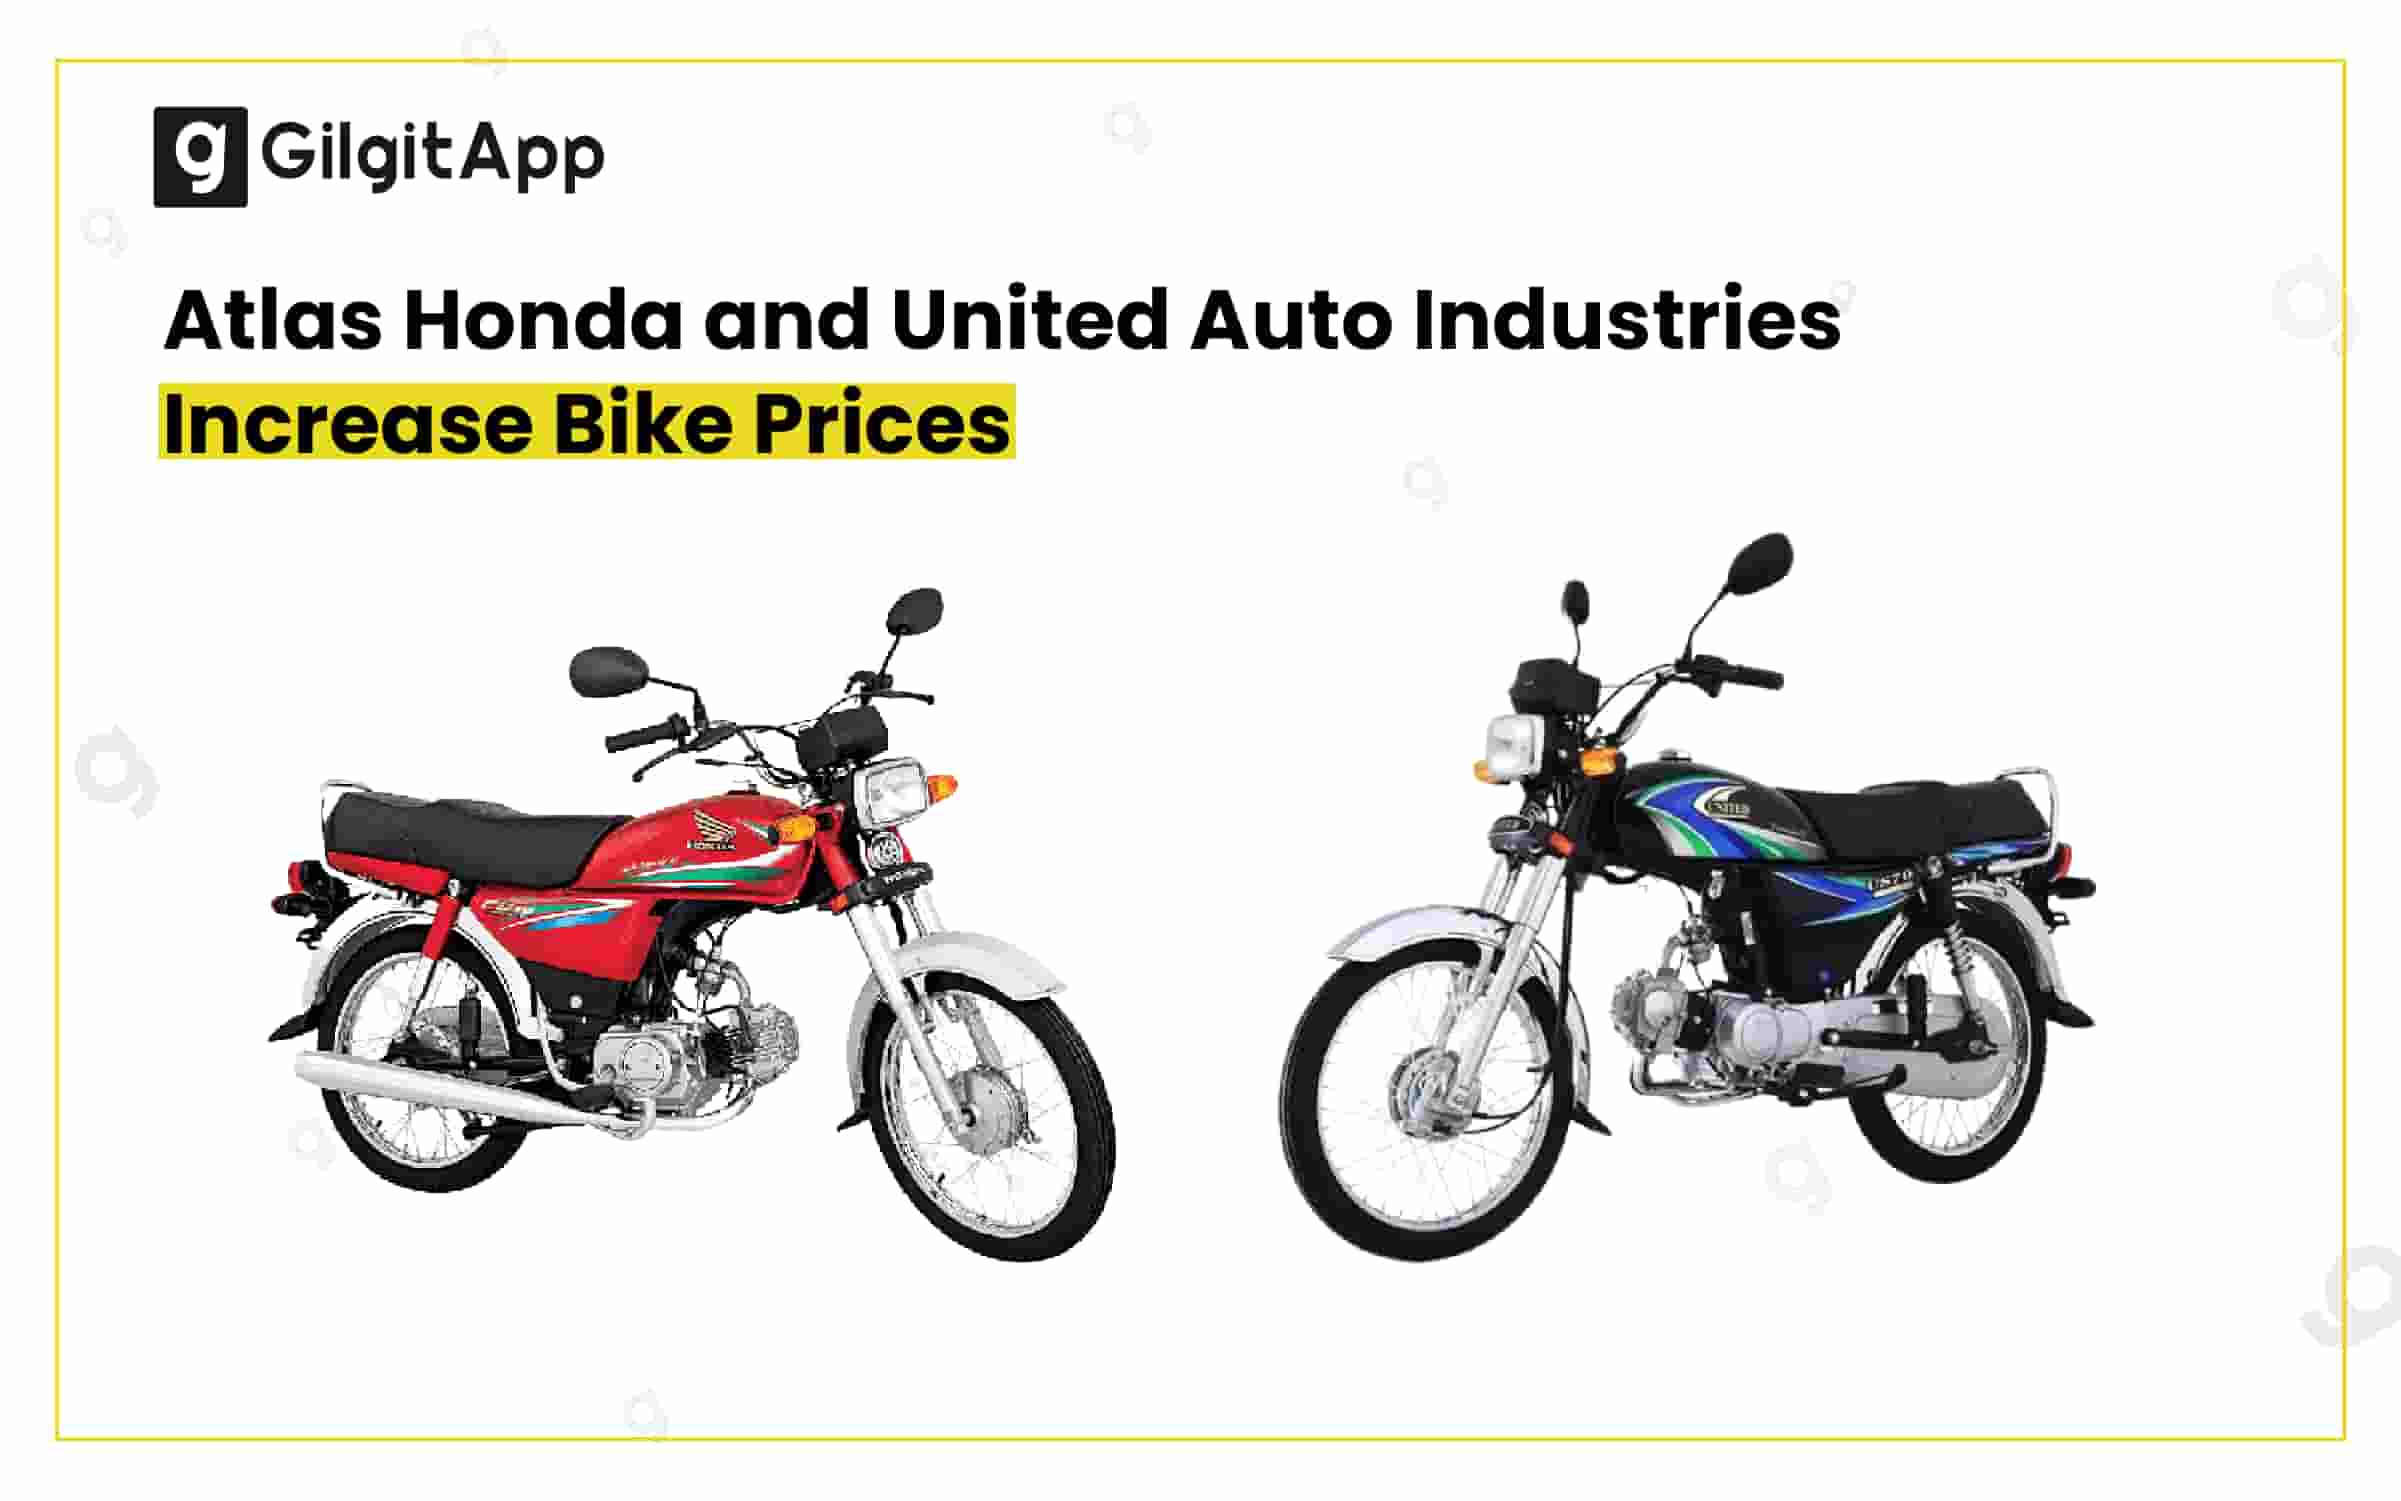 Atlas Honda and United Auto Industries Increase Bike Prices